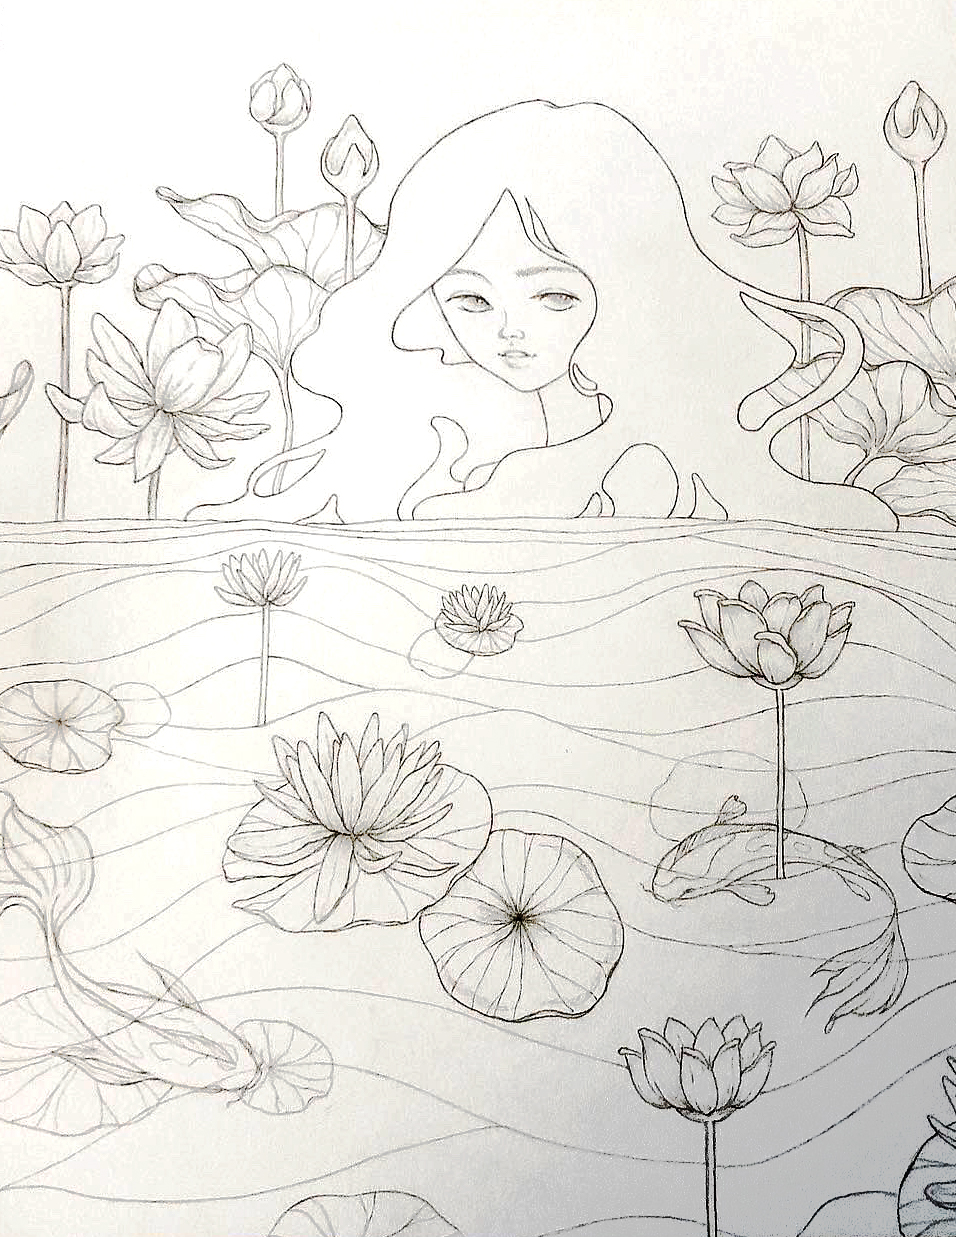 Nymph-in-Lily-Pond-sketch